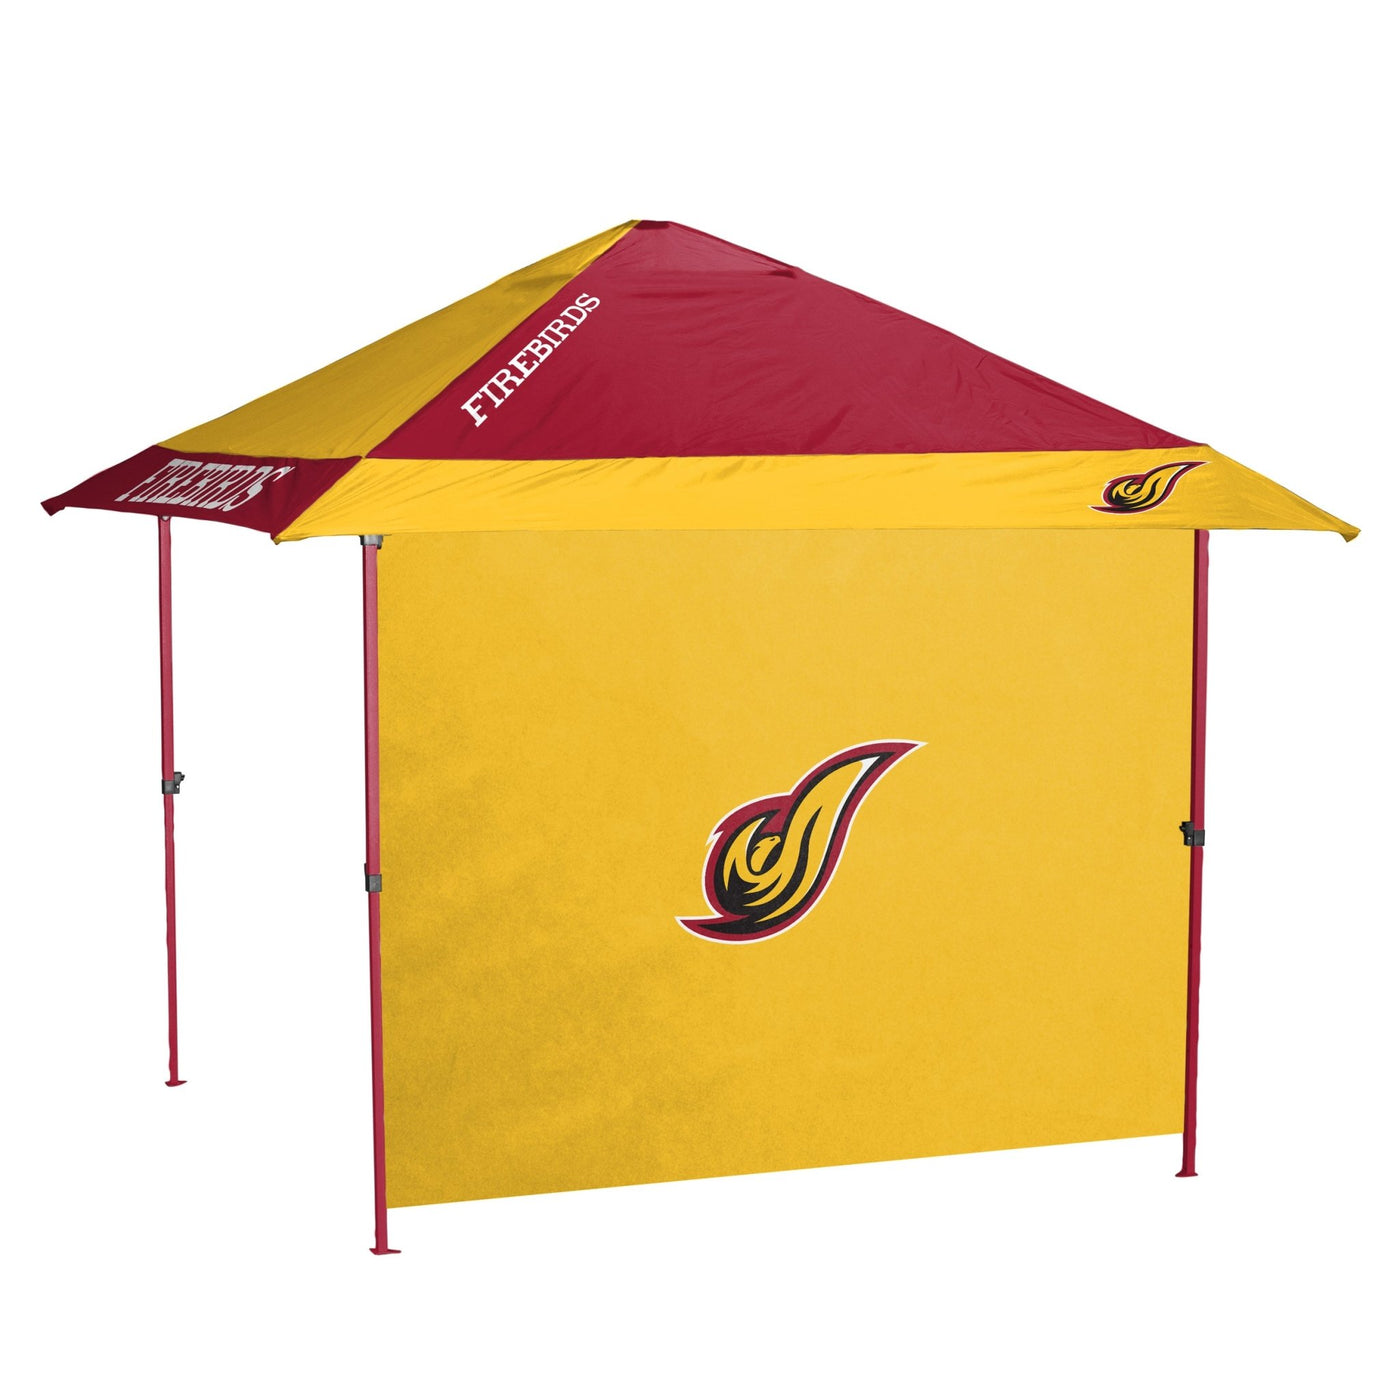 Univ of District of Columbia 12x12 Pagoda Canopy - Logo Brands